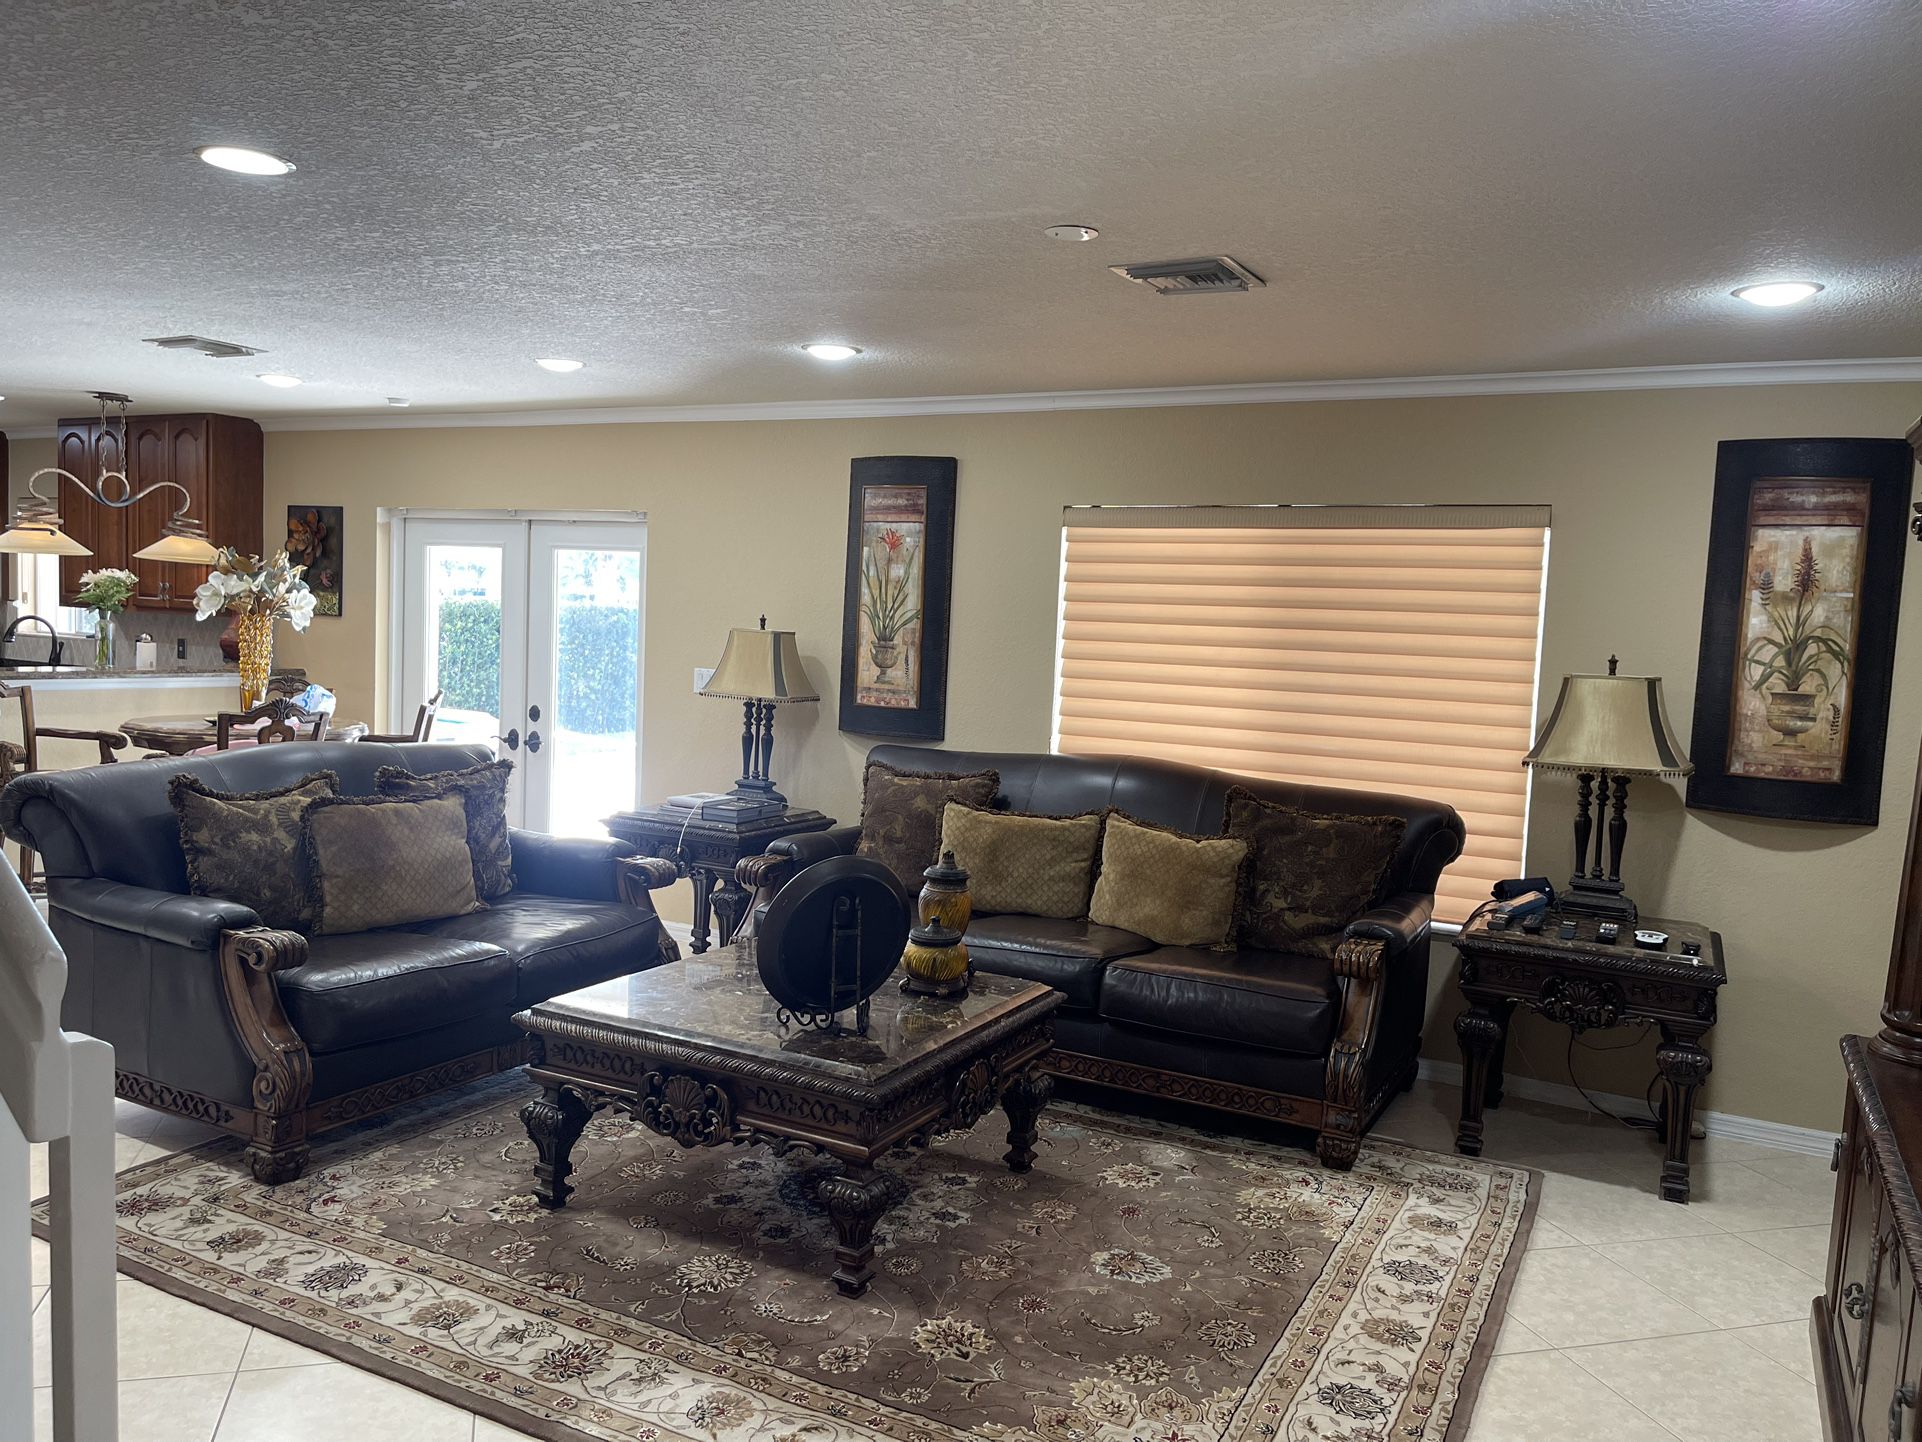 Living Room,wall unit,coffee table,pictures,lamps,light fixture,couch,console,breakfast table